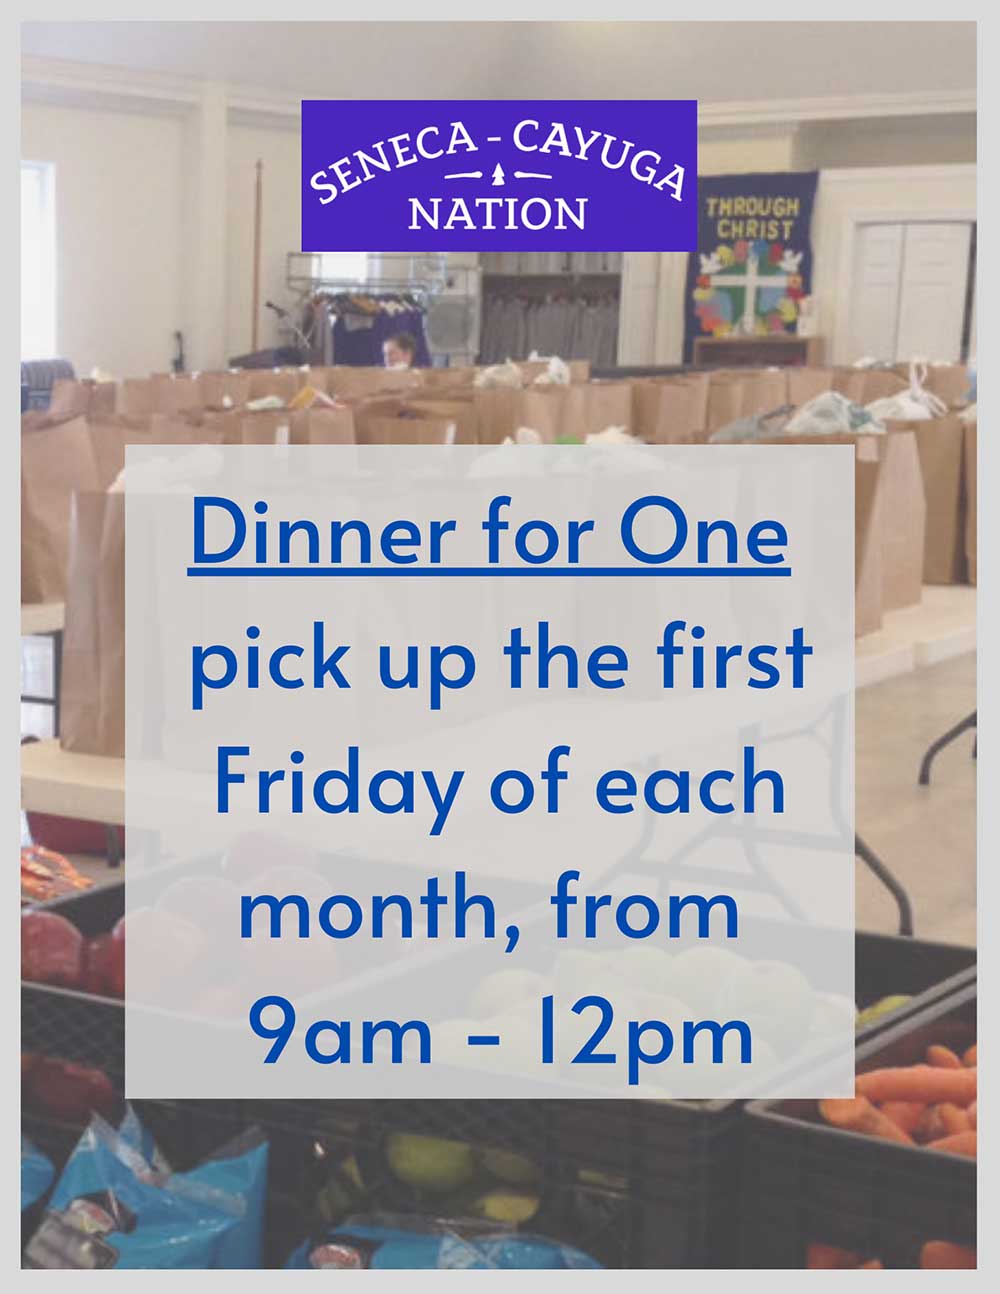 Dinner for One pick up the first Friday of each month, from 9am - 12pm